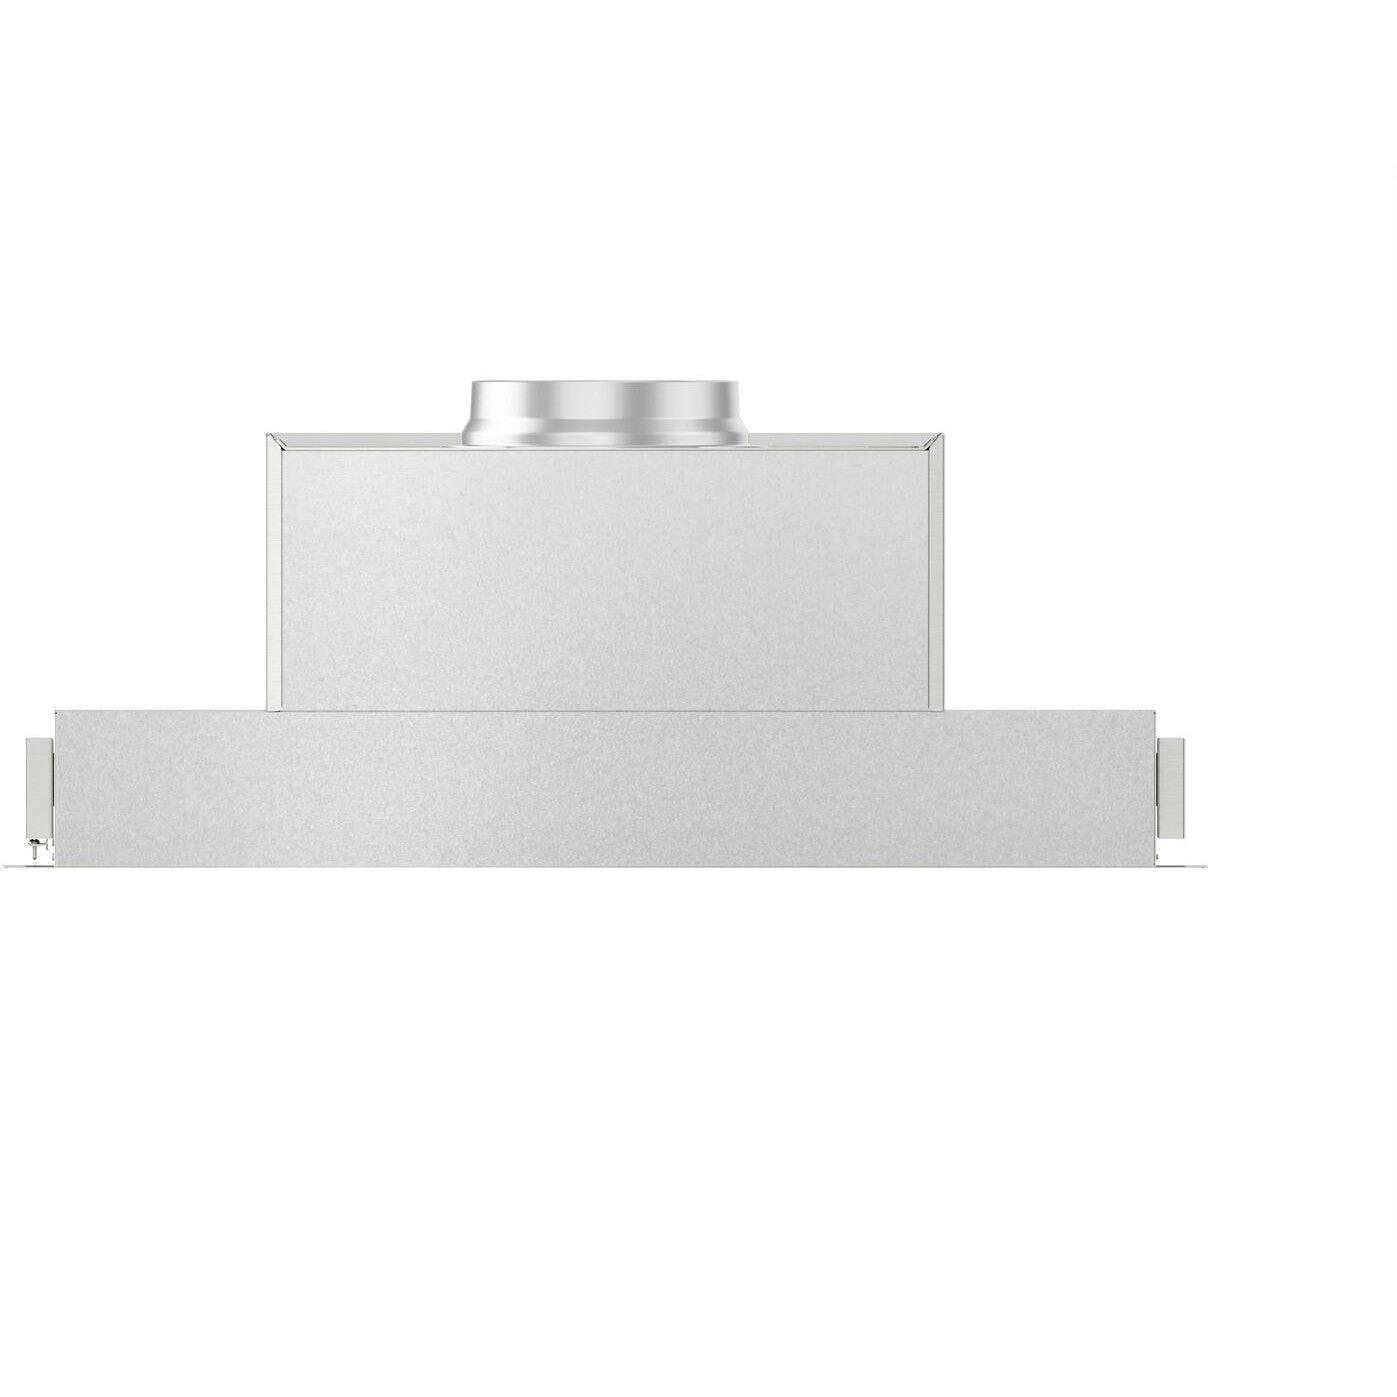 Forte Maya 36" 1100 CFM Convertible Residential Round Duct Stainless Steel Cabinet Insert Range Hood With LED Bar Lighting